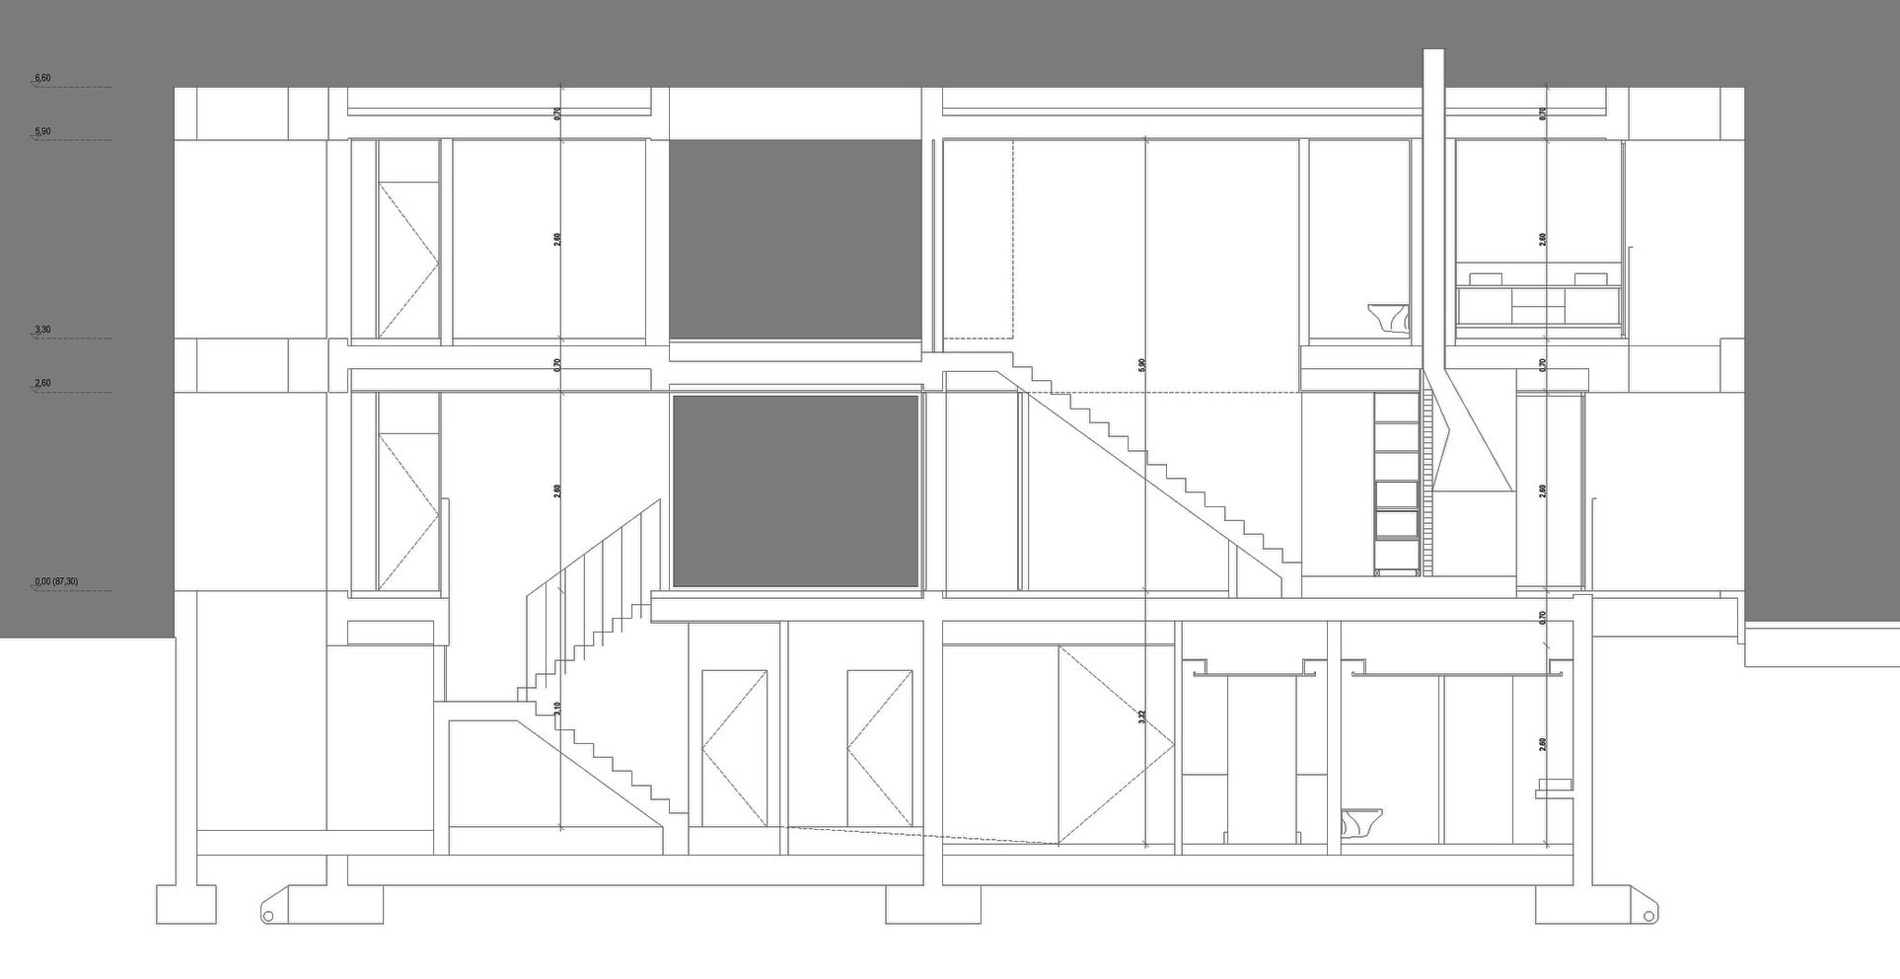 Section, C+P House in Lisbon, Portugal by Gonçalo das Neves Nunes